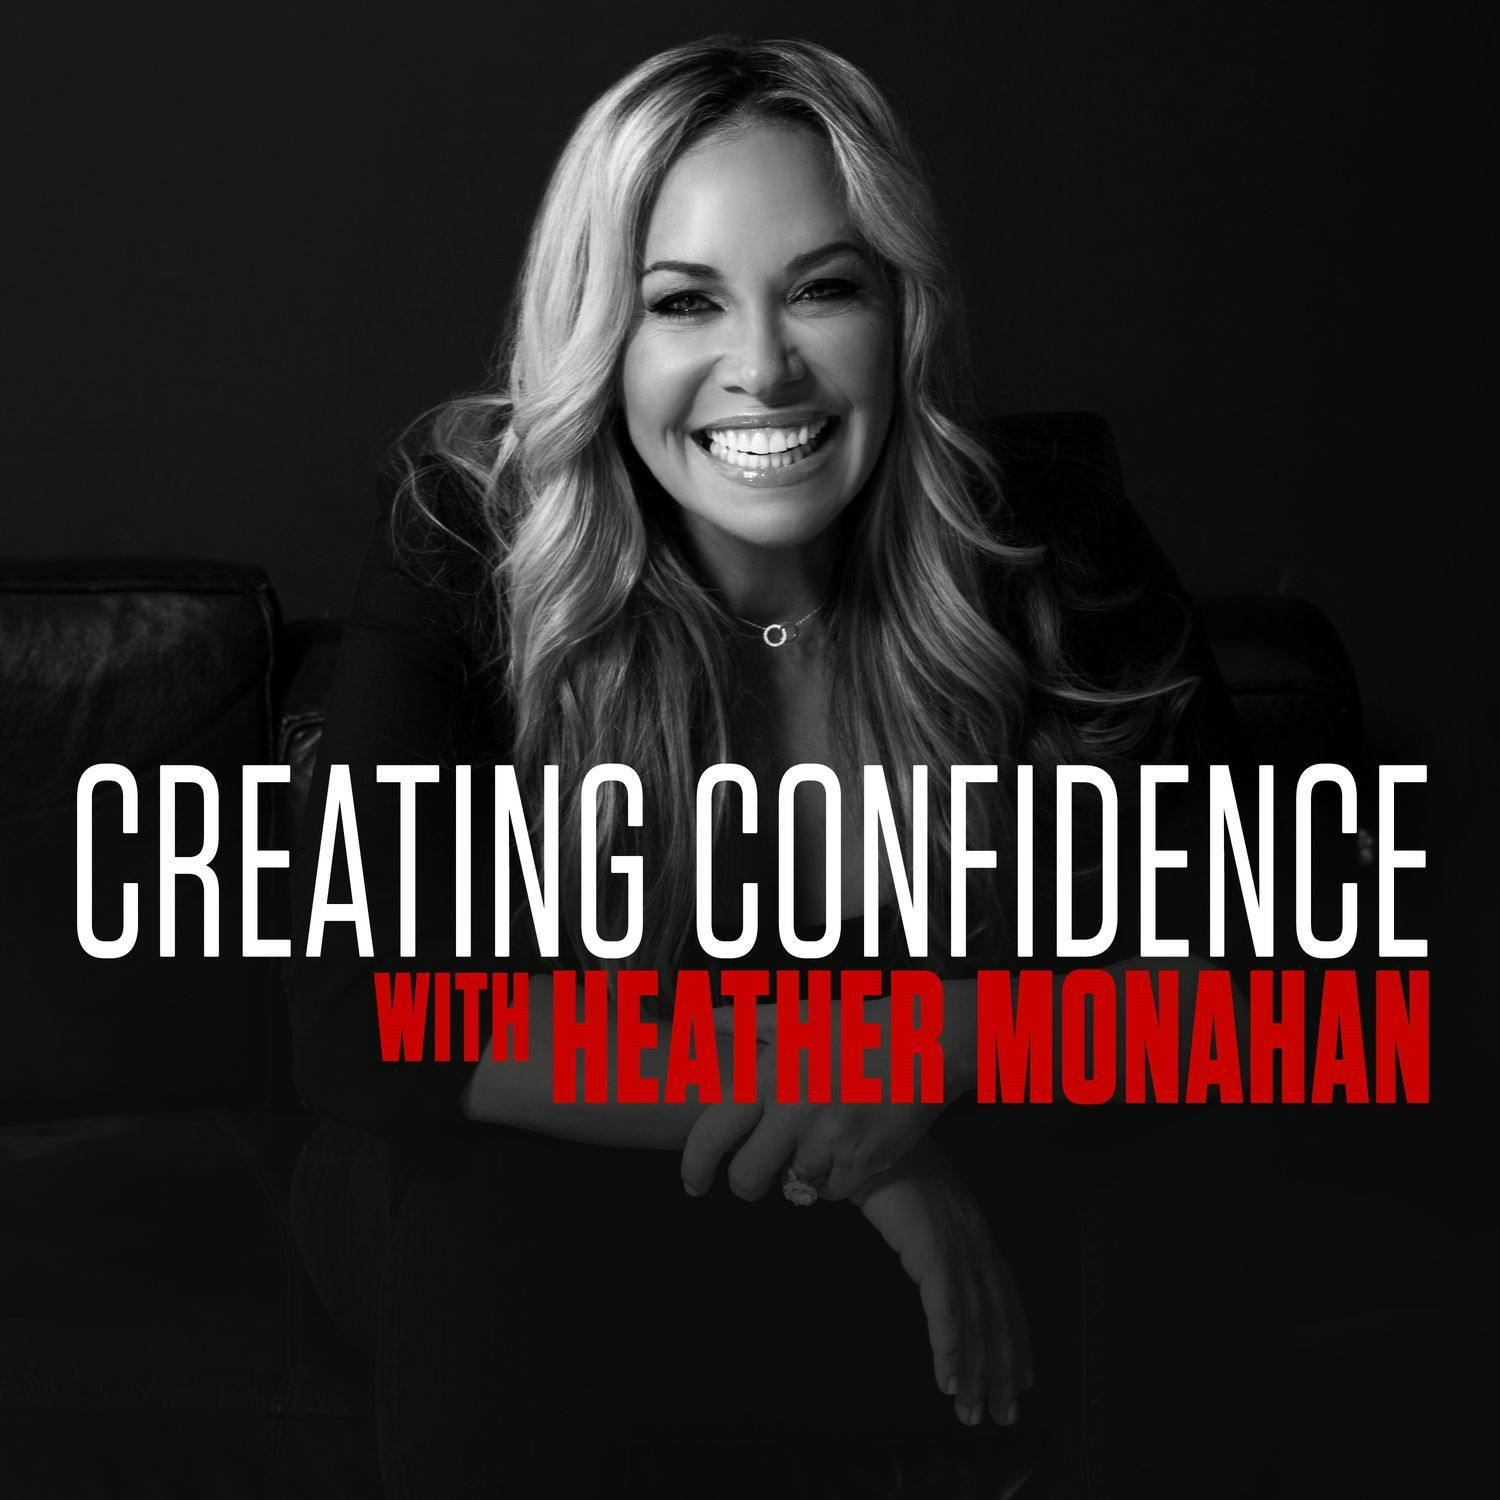 #183: Conquer Your Fears & OVERCOME Adversity! With Ben Newman Performance Coach For The Alabama Crimson Tide Football Team  by Heather Monahan | YAP Media Network